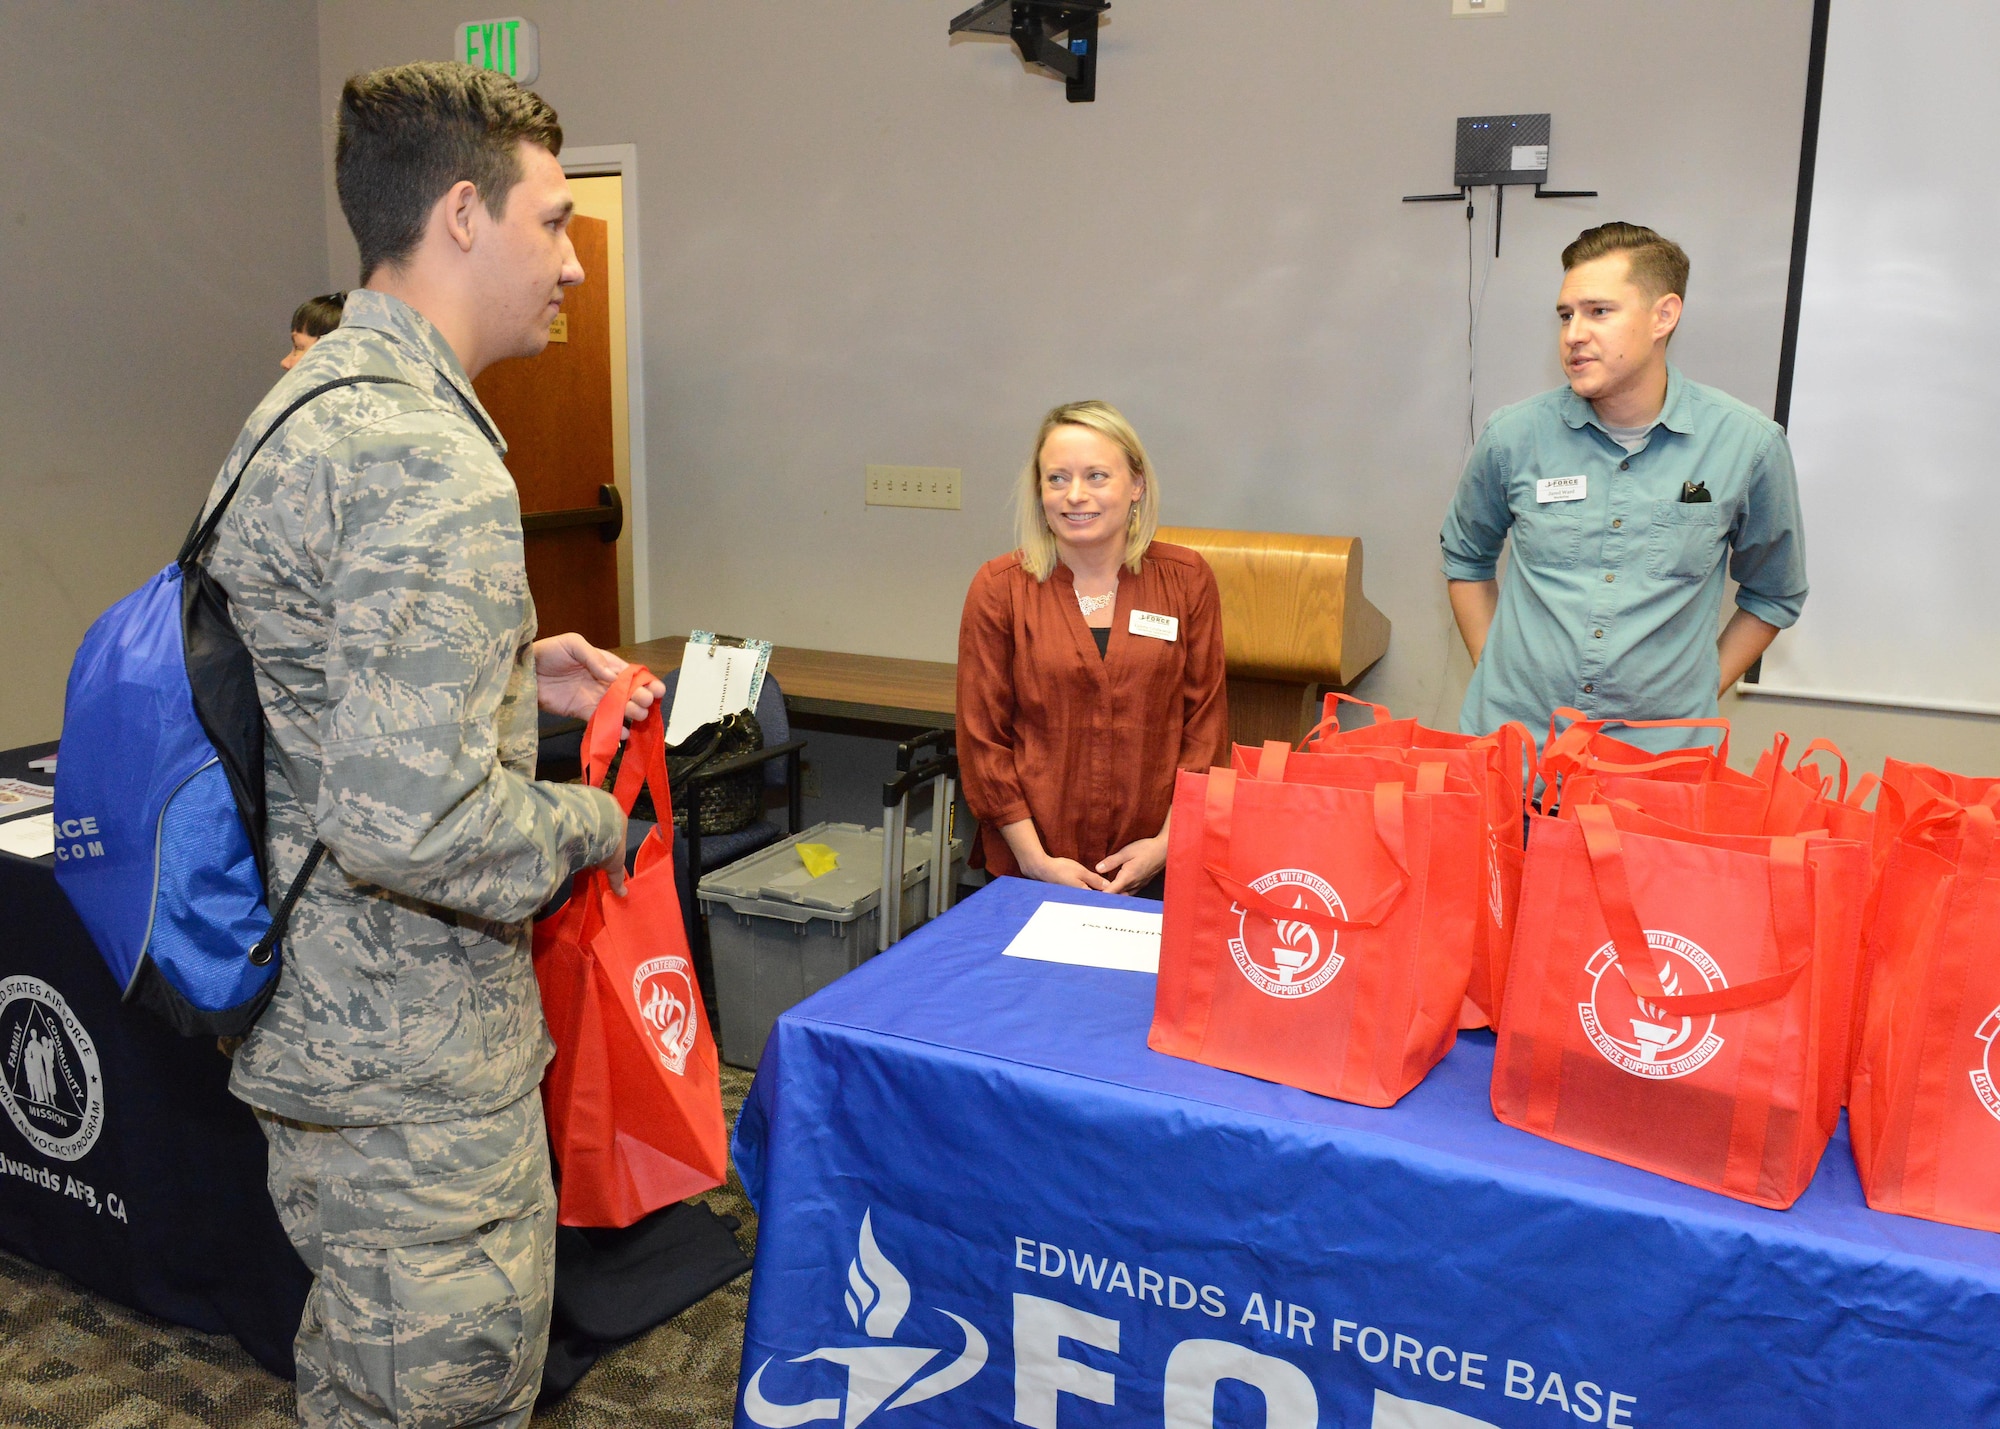 Many participants at the Newcomer’s Orientation Briefing information fair Nov. 2 handed out free gifts as a way to welcome those new to Edwards AFB. The information fair was held in the Airman and Family Readiness Center Looking Glass Room. (U.S. Air Force photo by Kenji Thuloweit)